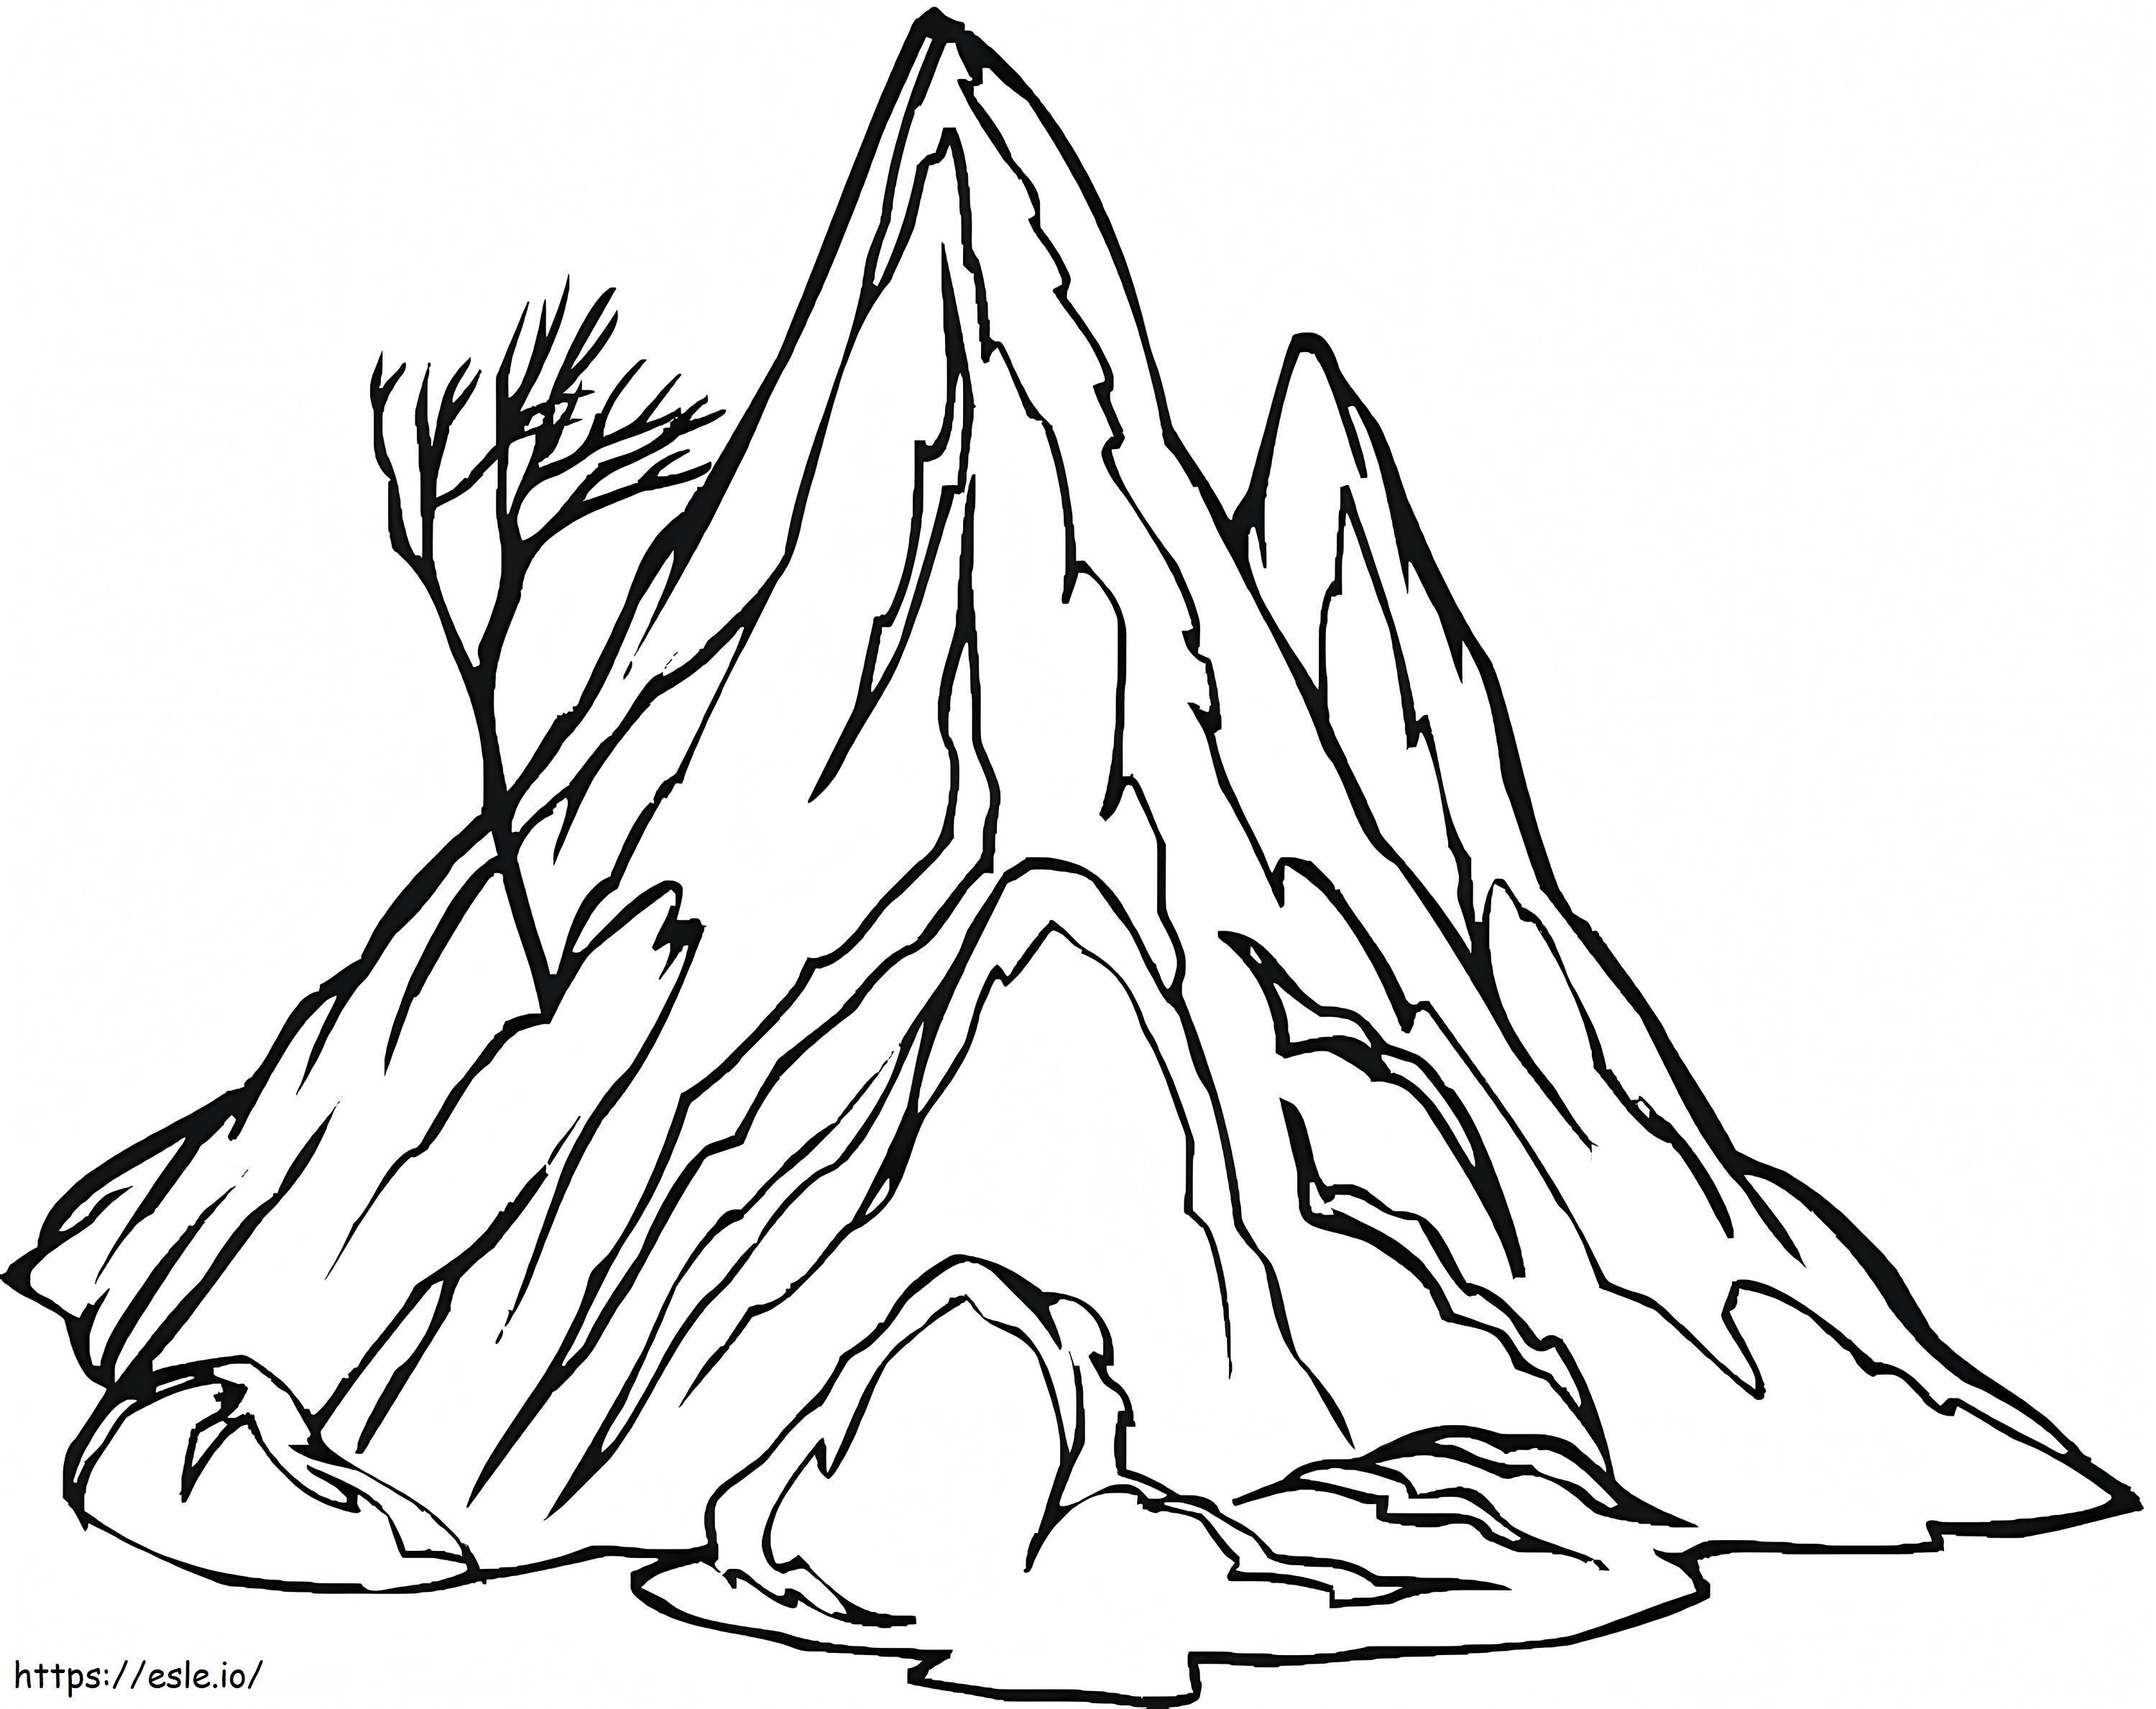 1564998642 Lonely Mountain E1600667880695 coloring page